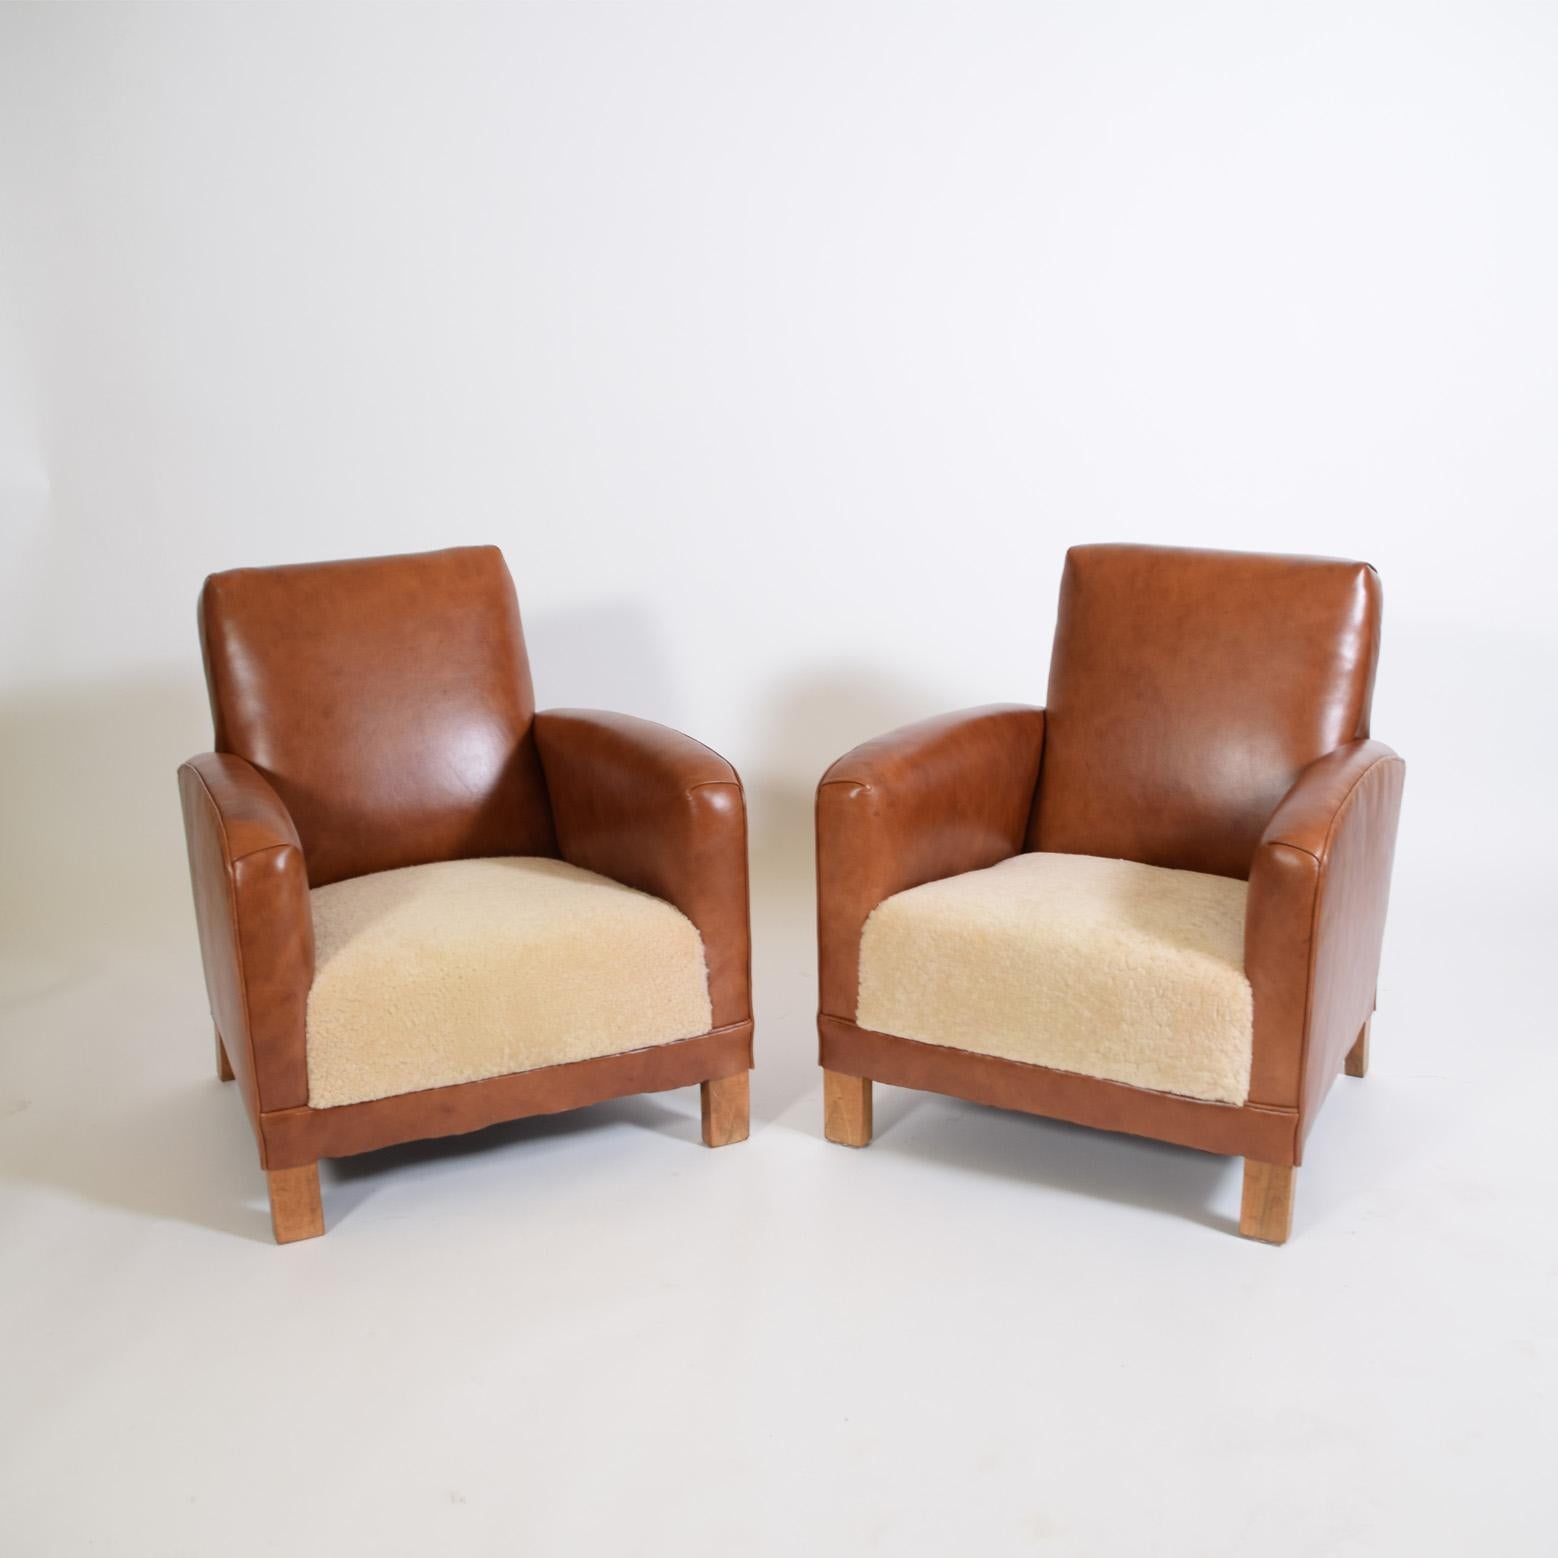 Newly upholstered leather / sheepskin 1930’s lounge chairs from Denmark solid walnut legs.